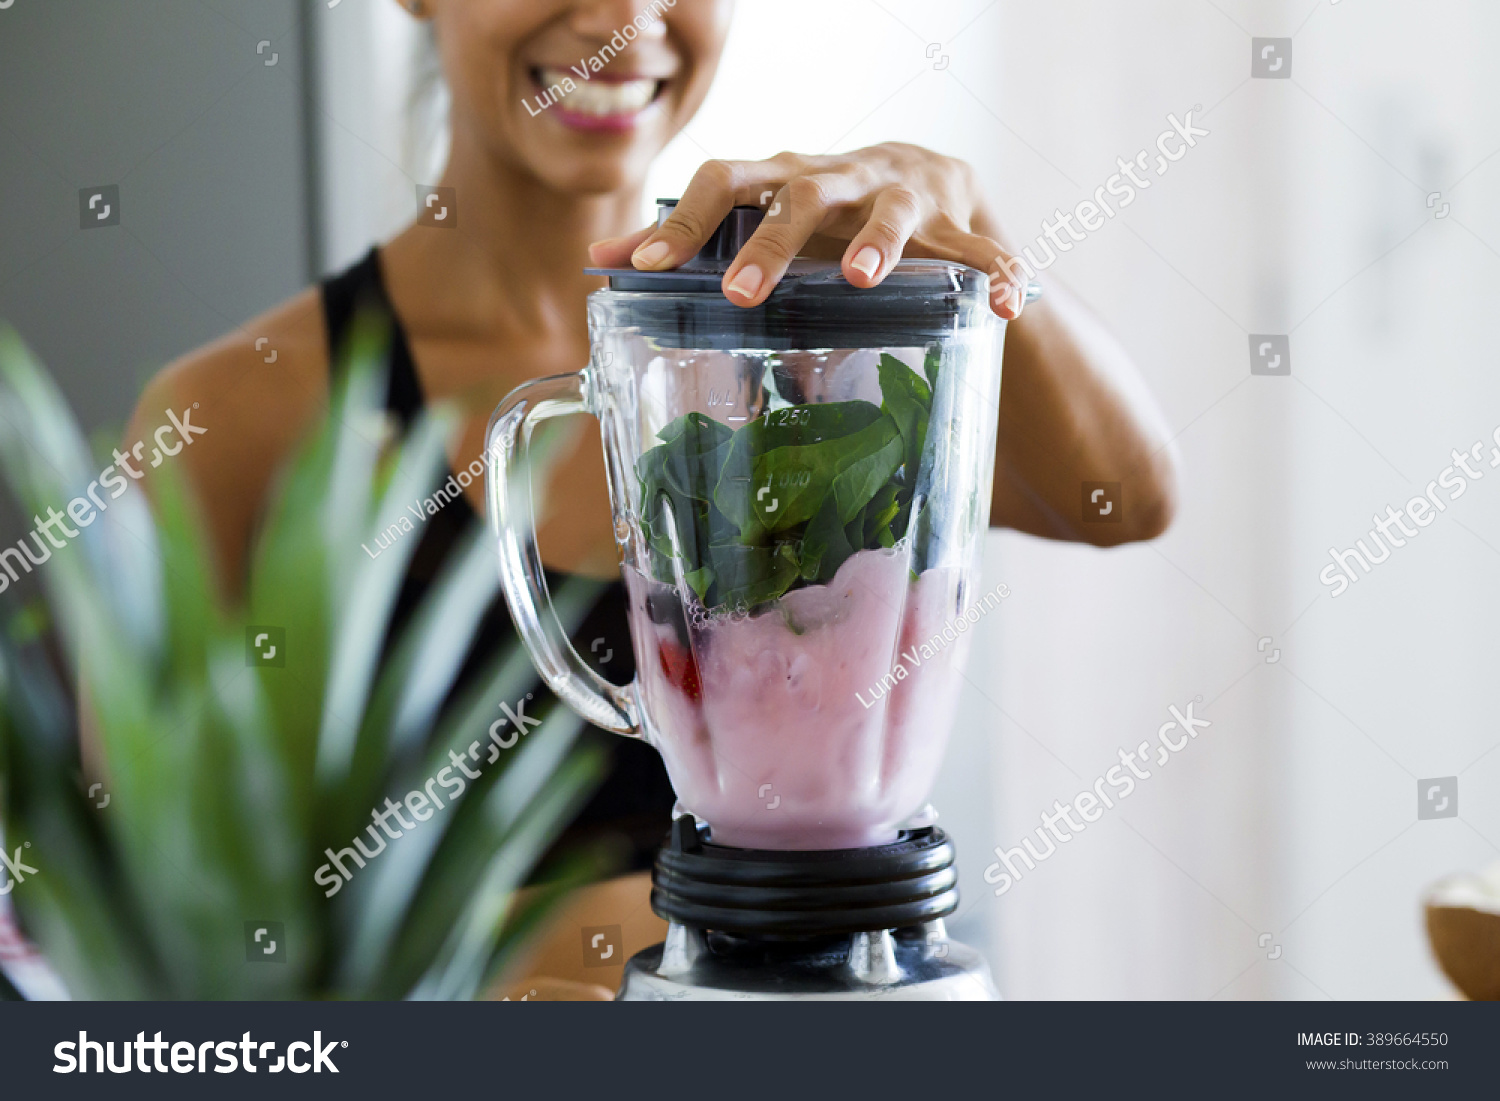 Woman blending spinach, berries, bananas and almond milk to make a healthy green smoothie #389664550